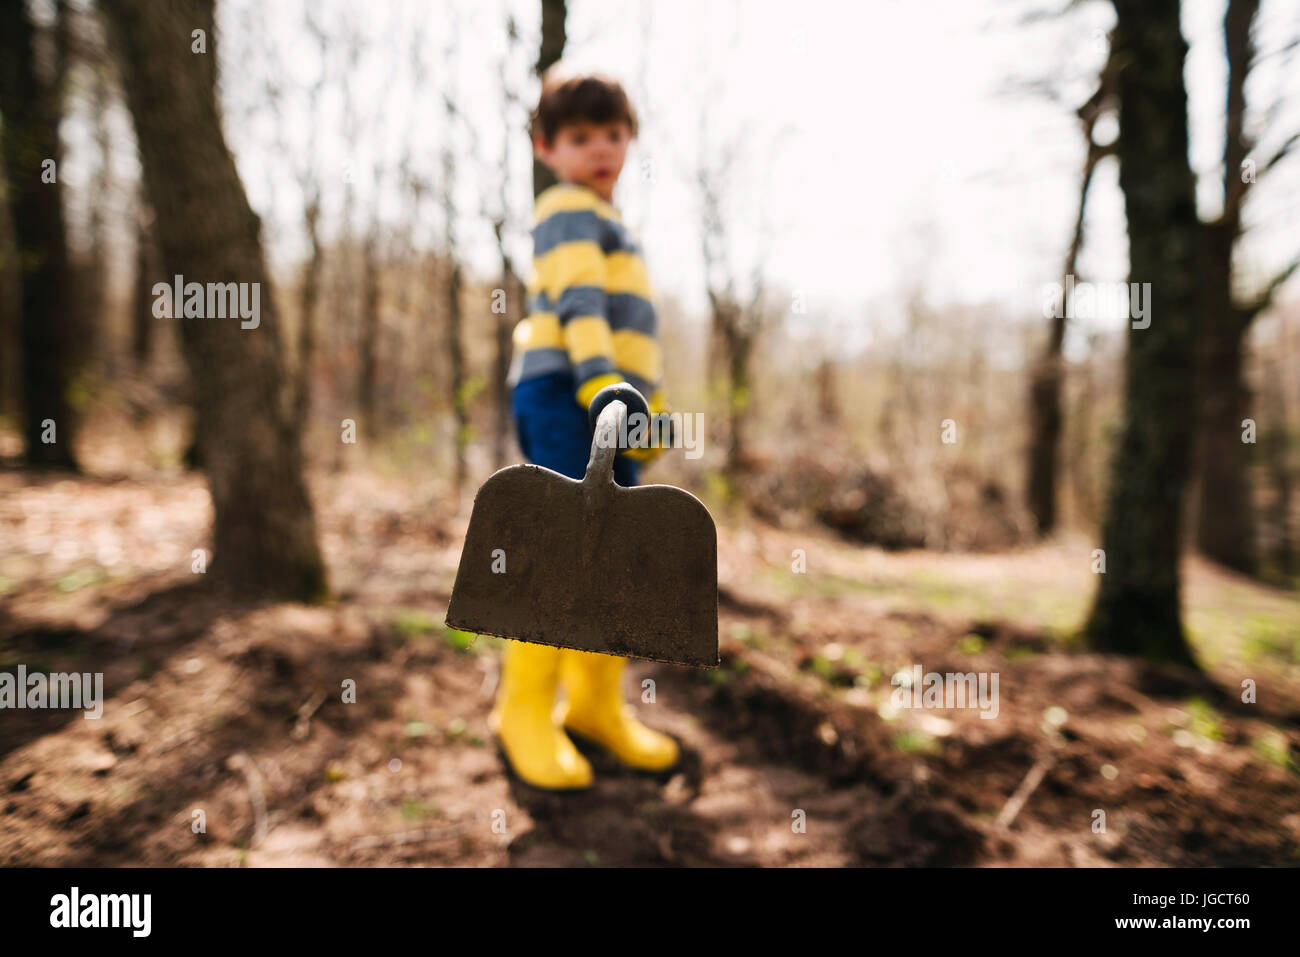 Boy standing in garden with a hoe Stock Photo